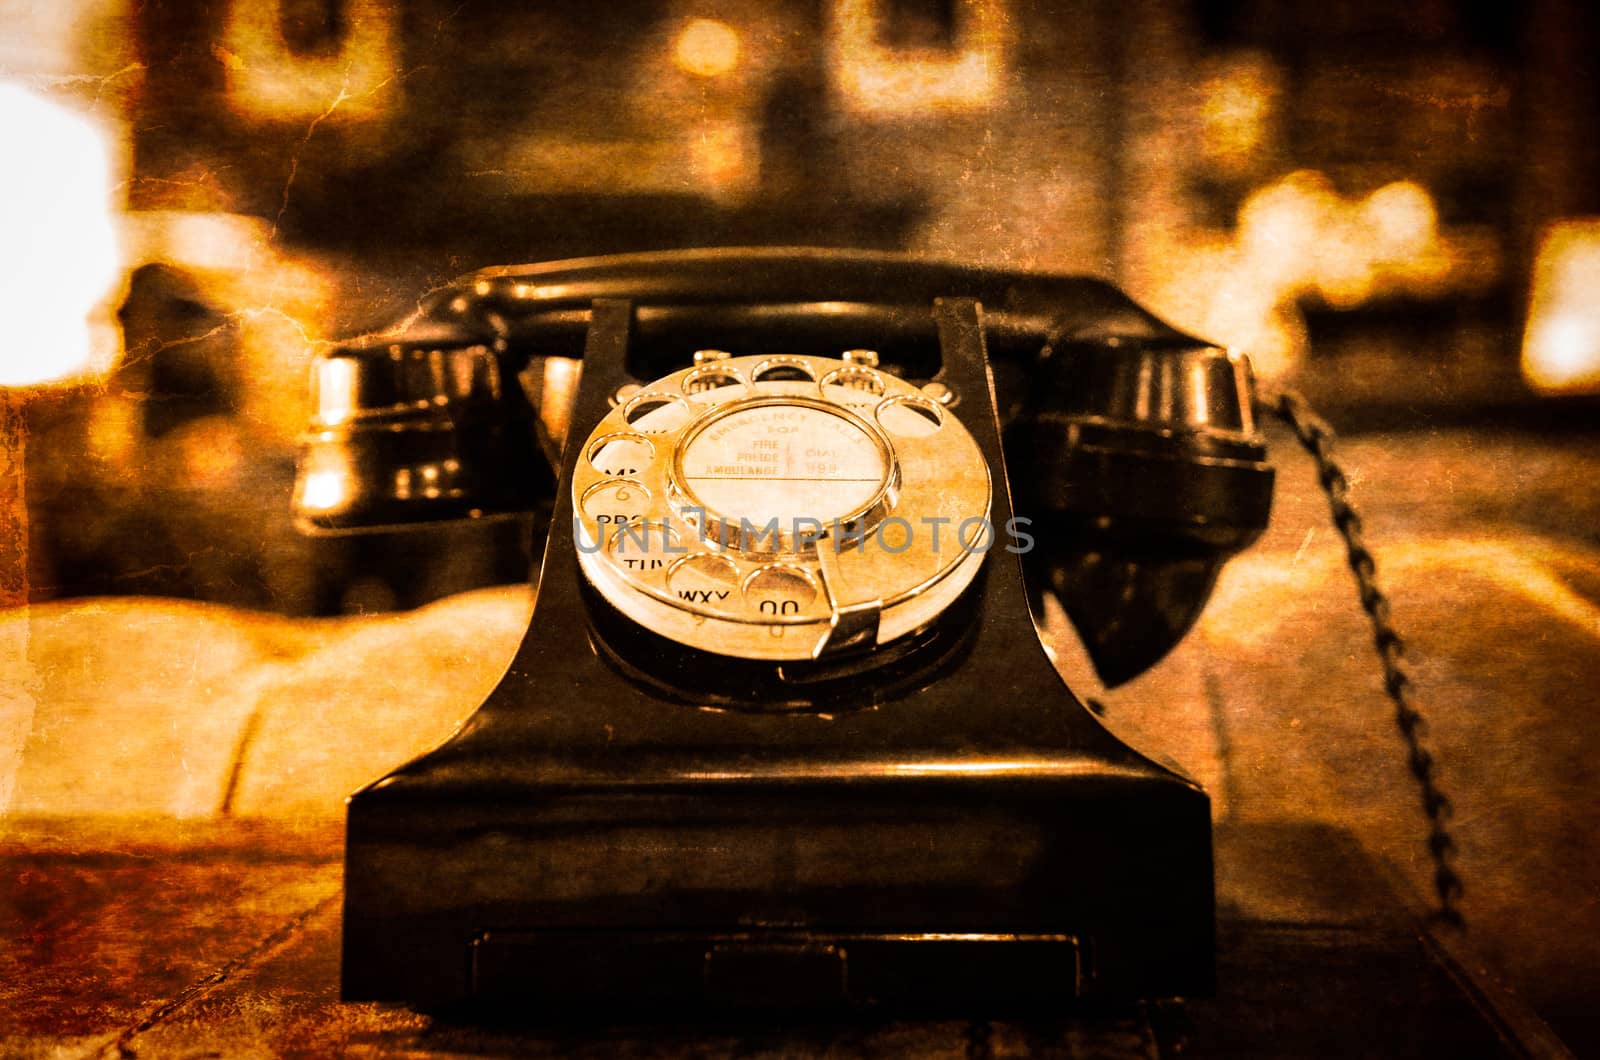 Detail view of old vintage dial telephone on the table  by martinm303